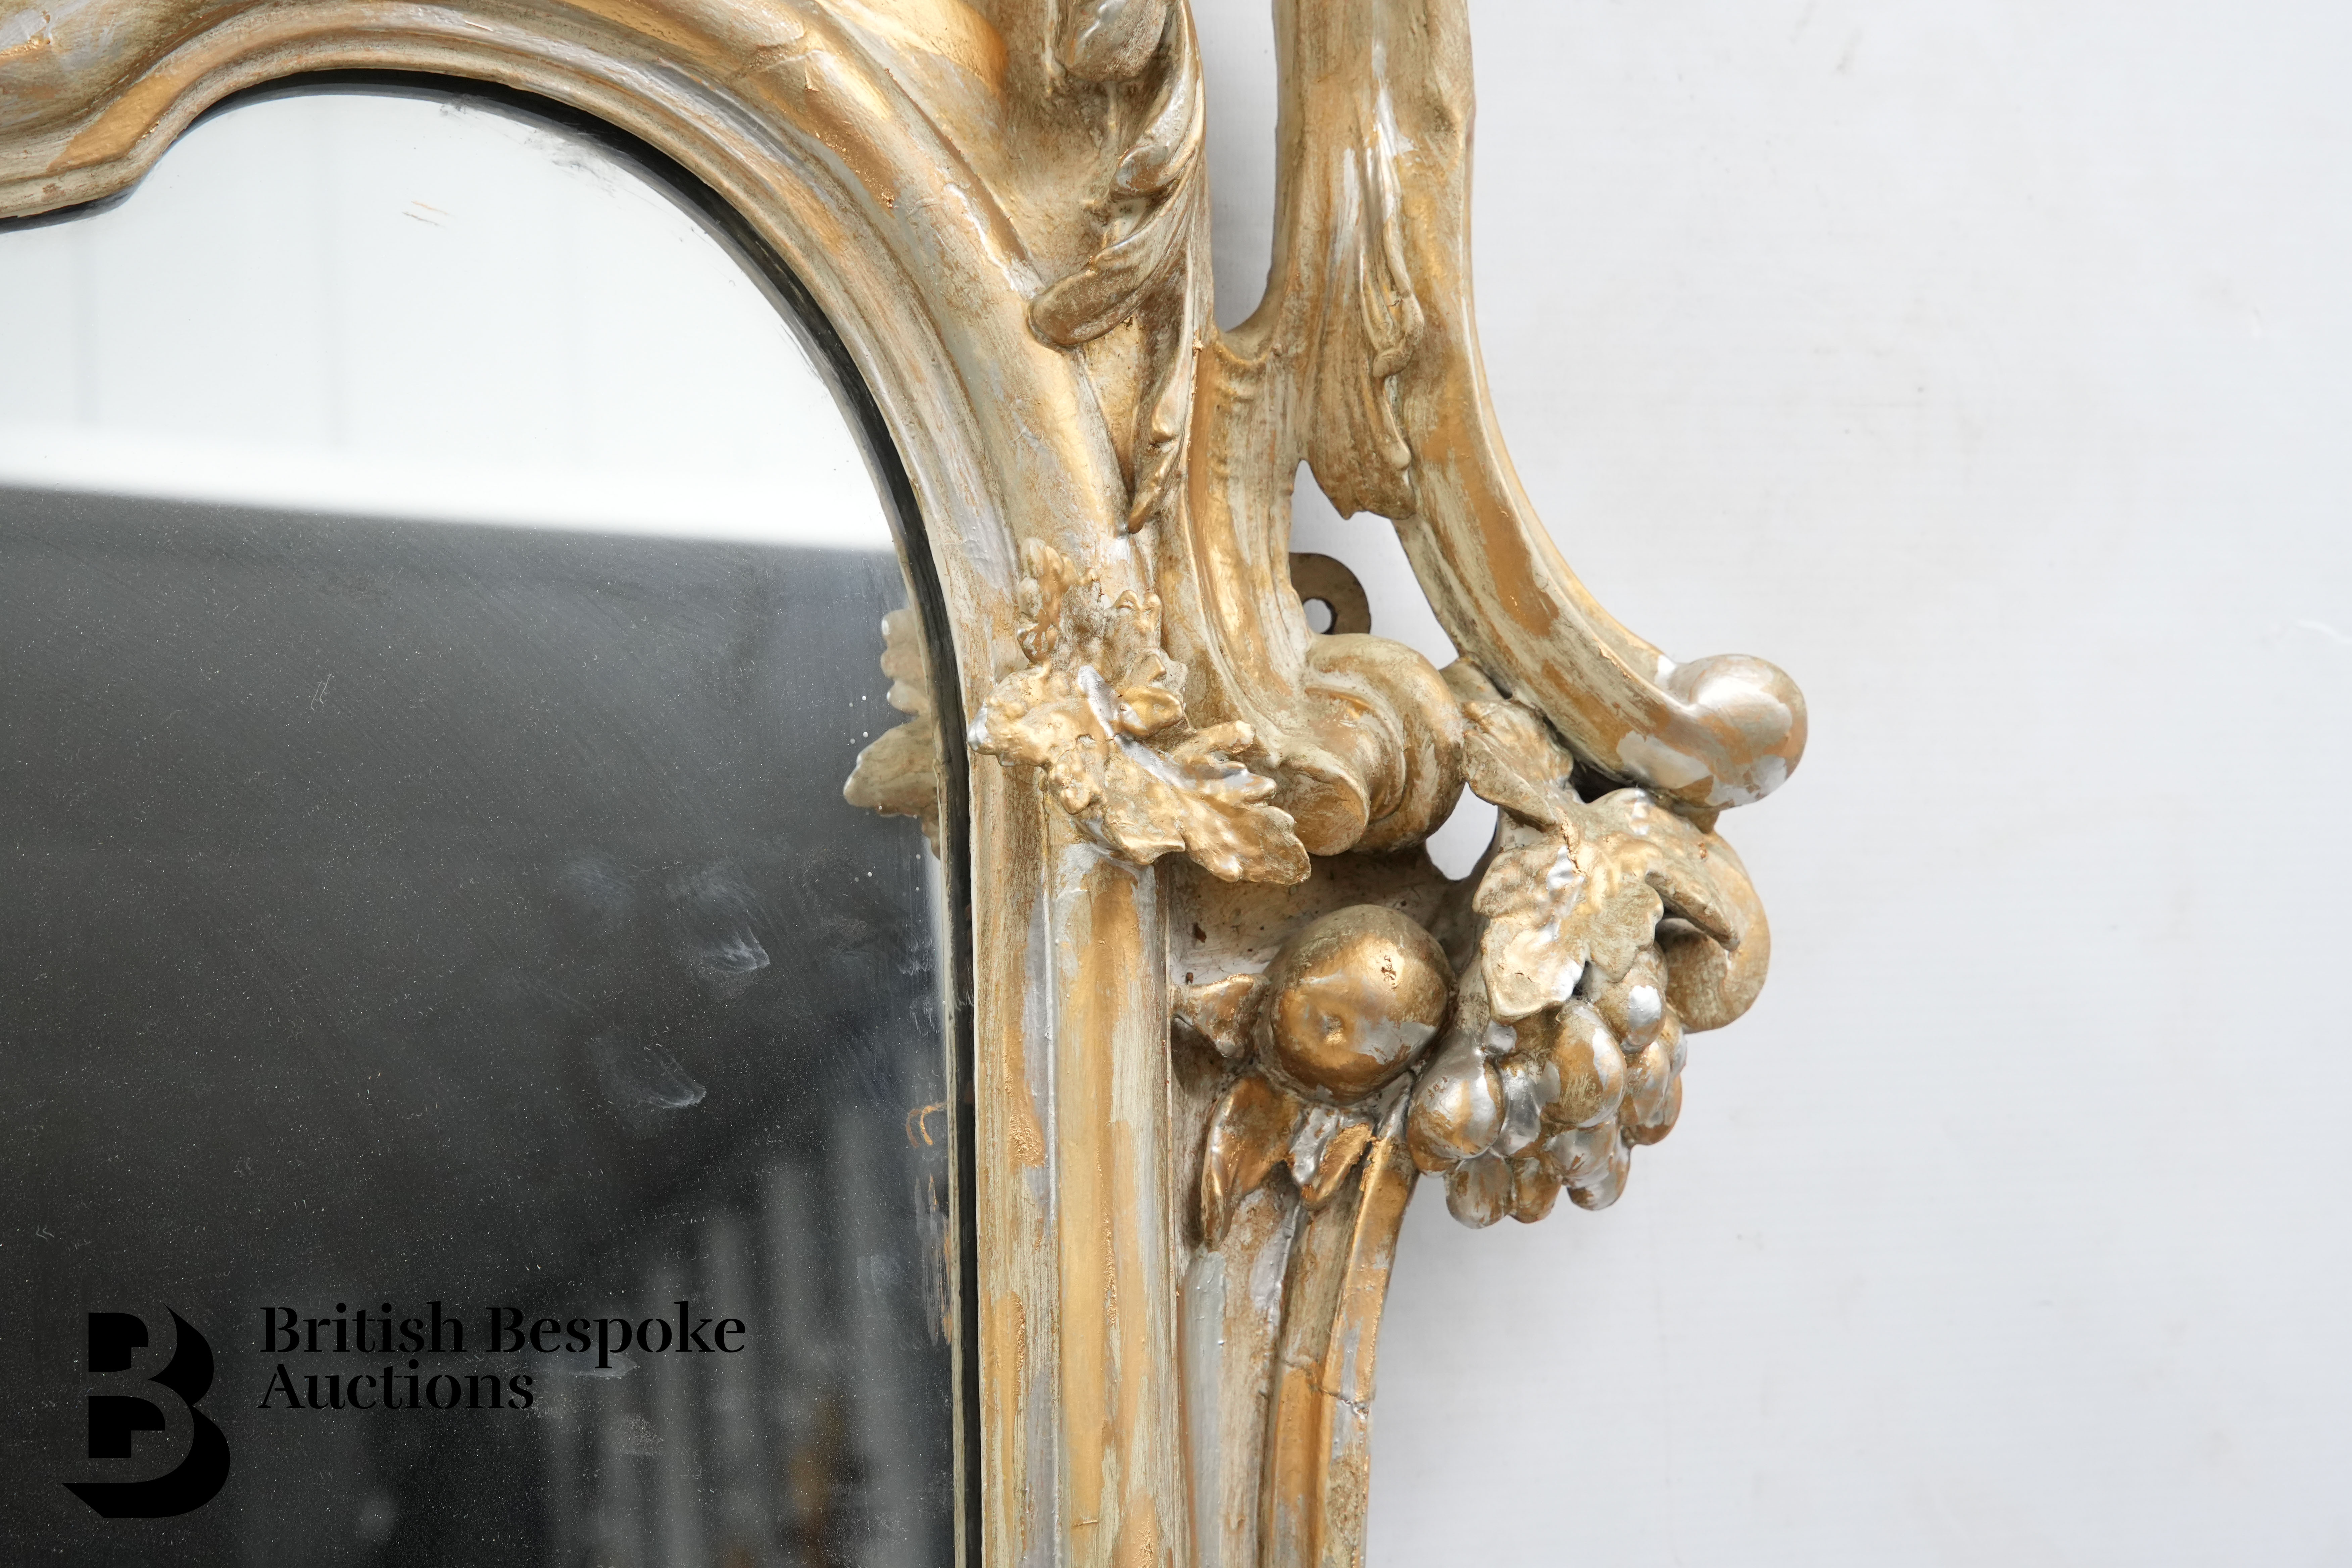 Substantial 20th Century Gilt Mirror - Image 6 of 9